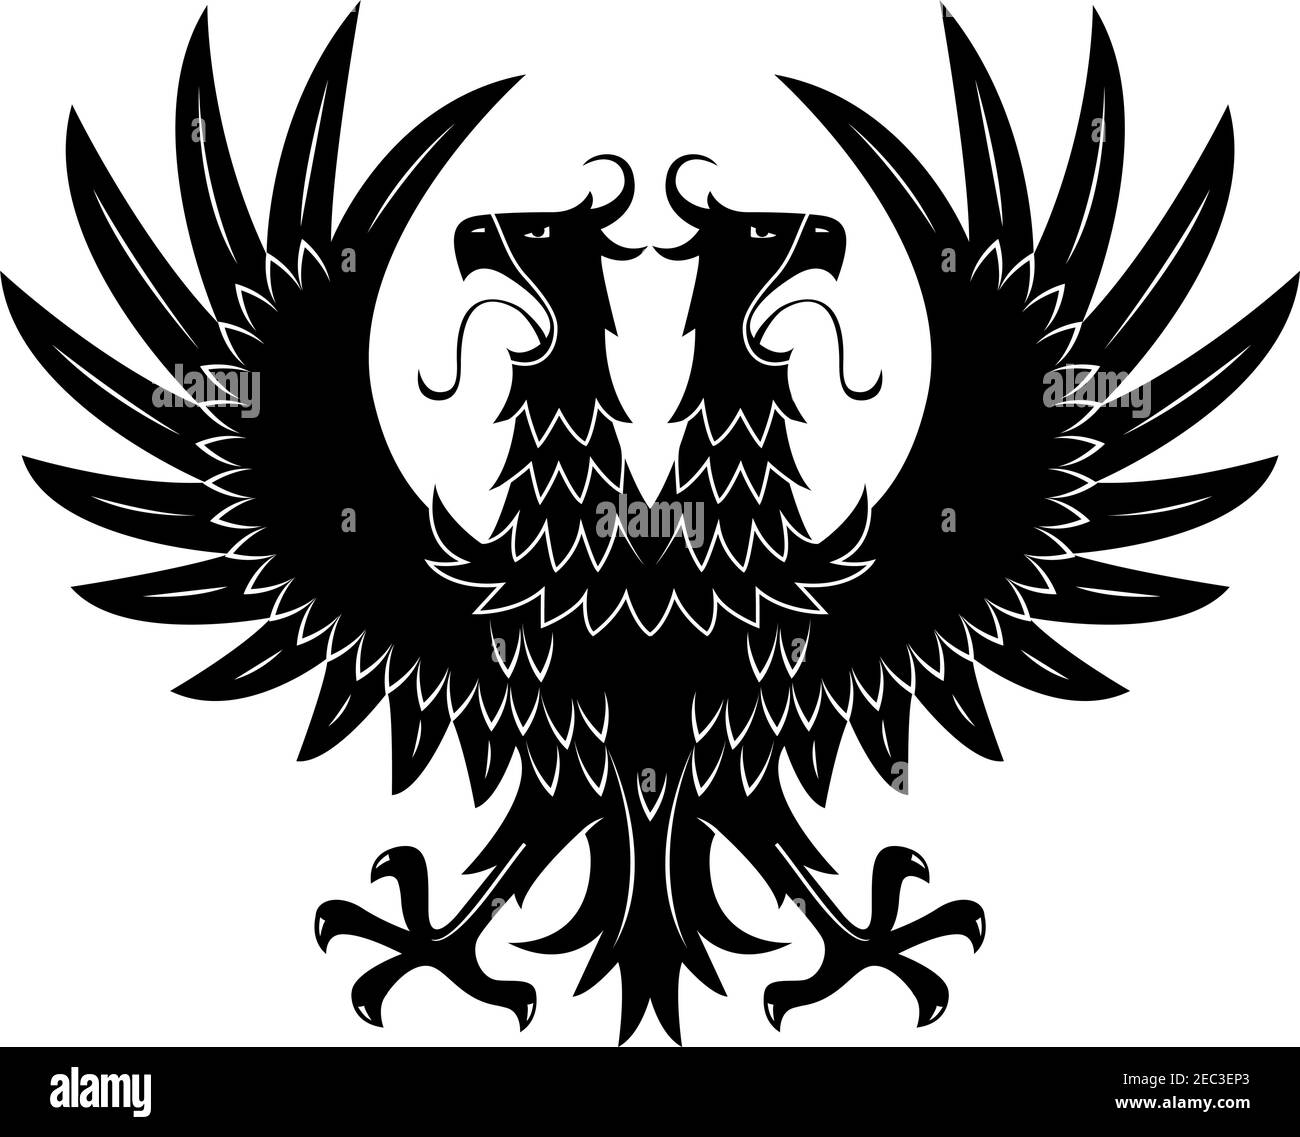 Double headed black eagle symbol with raised wings and wide open beaks with long tongues. Medieval royal heraldry or coat of arms design usage Stock Vector